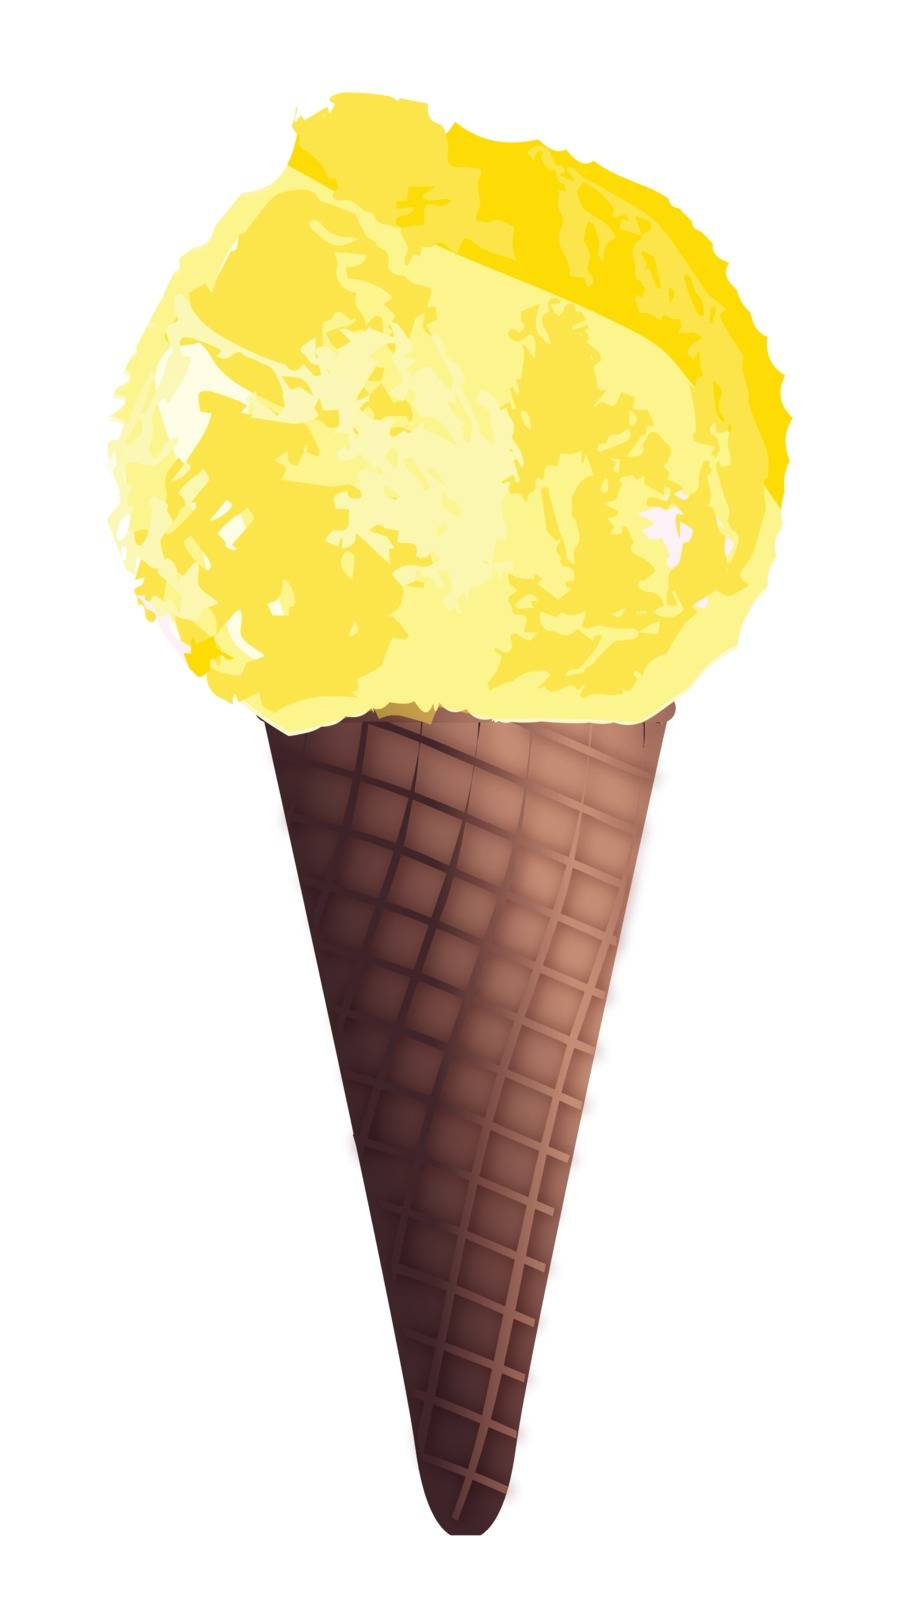 A colection of ice cream cone icons on white